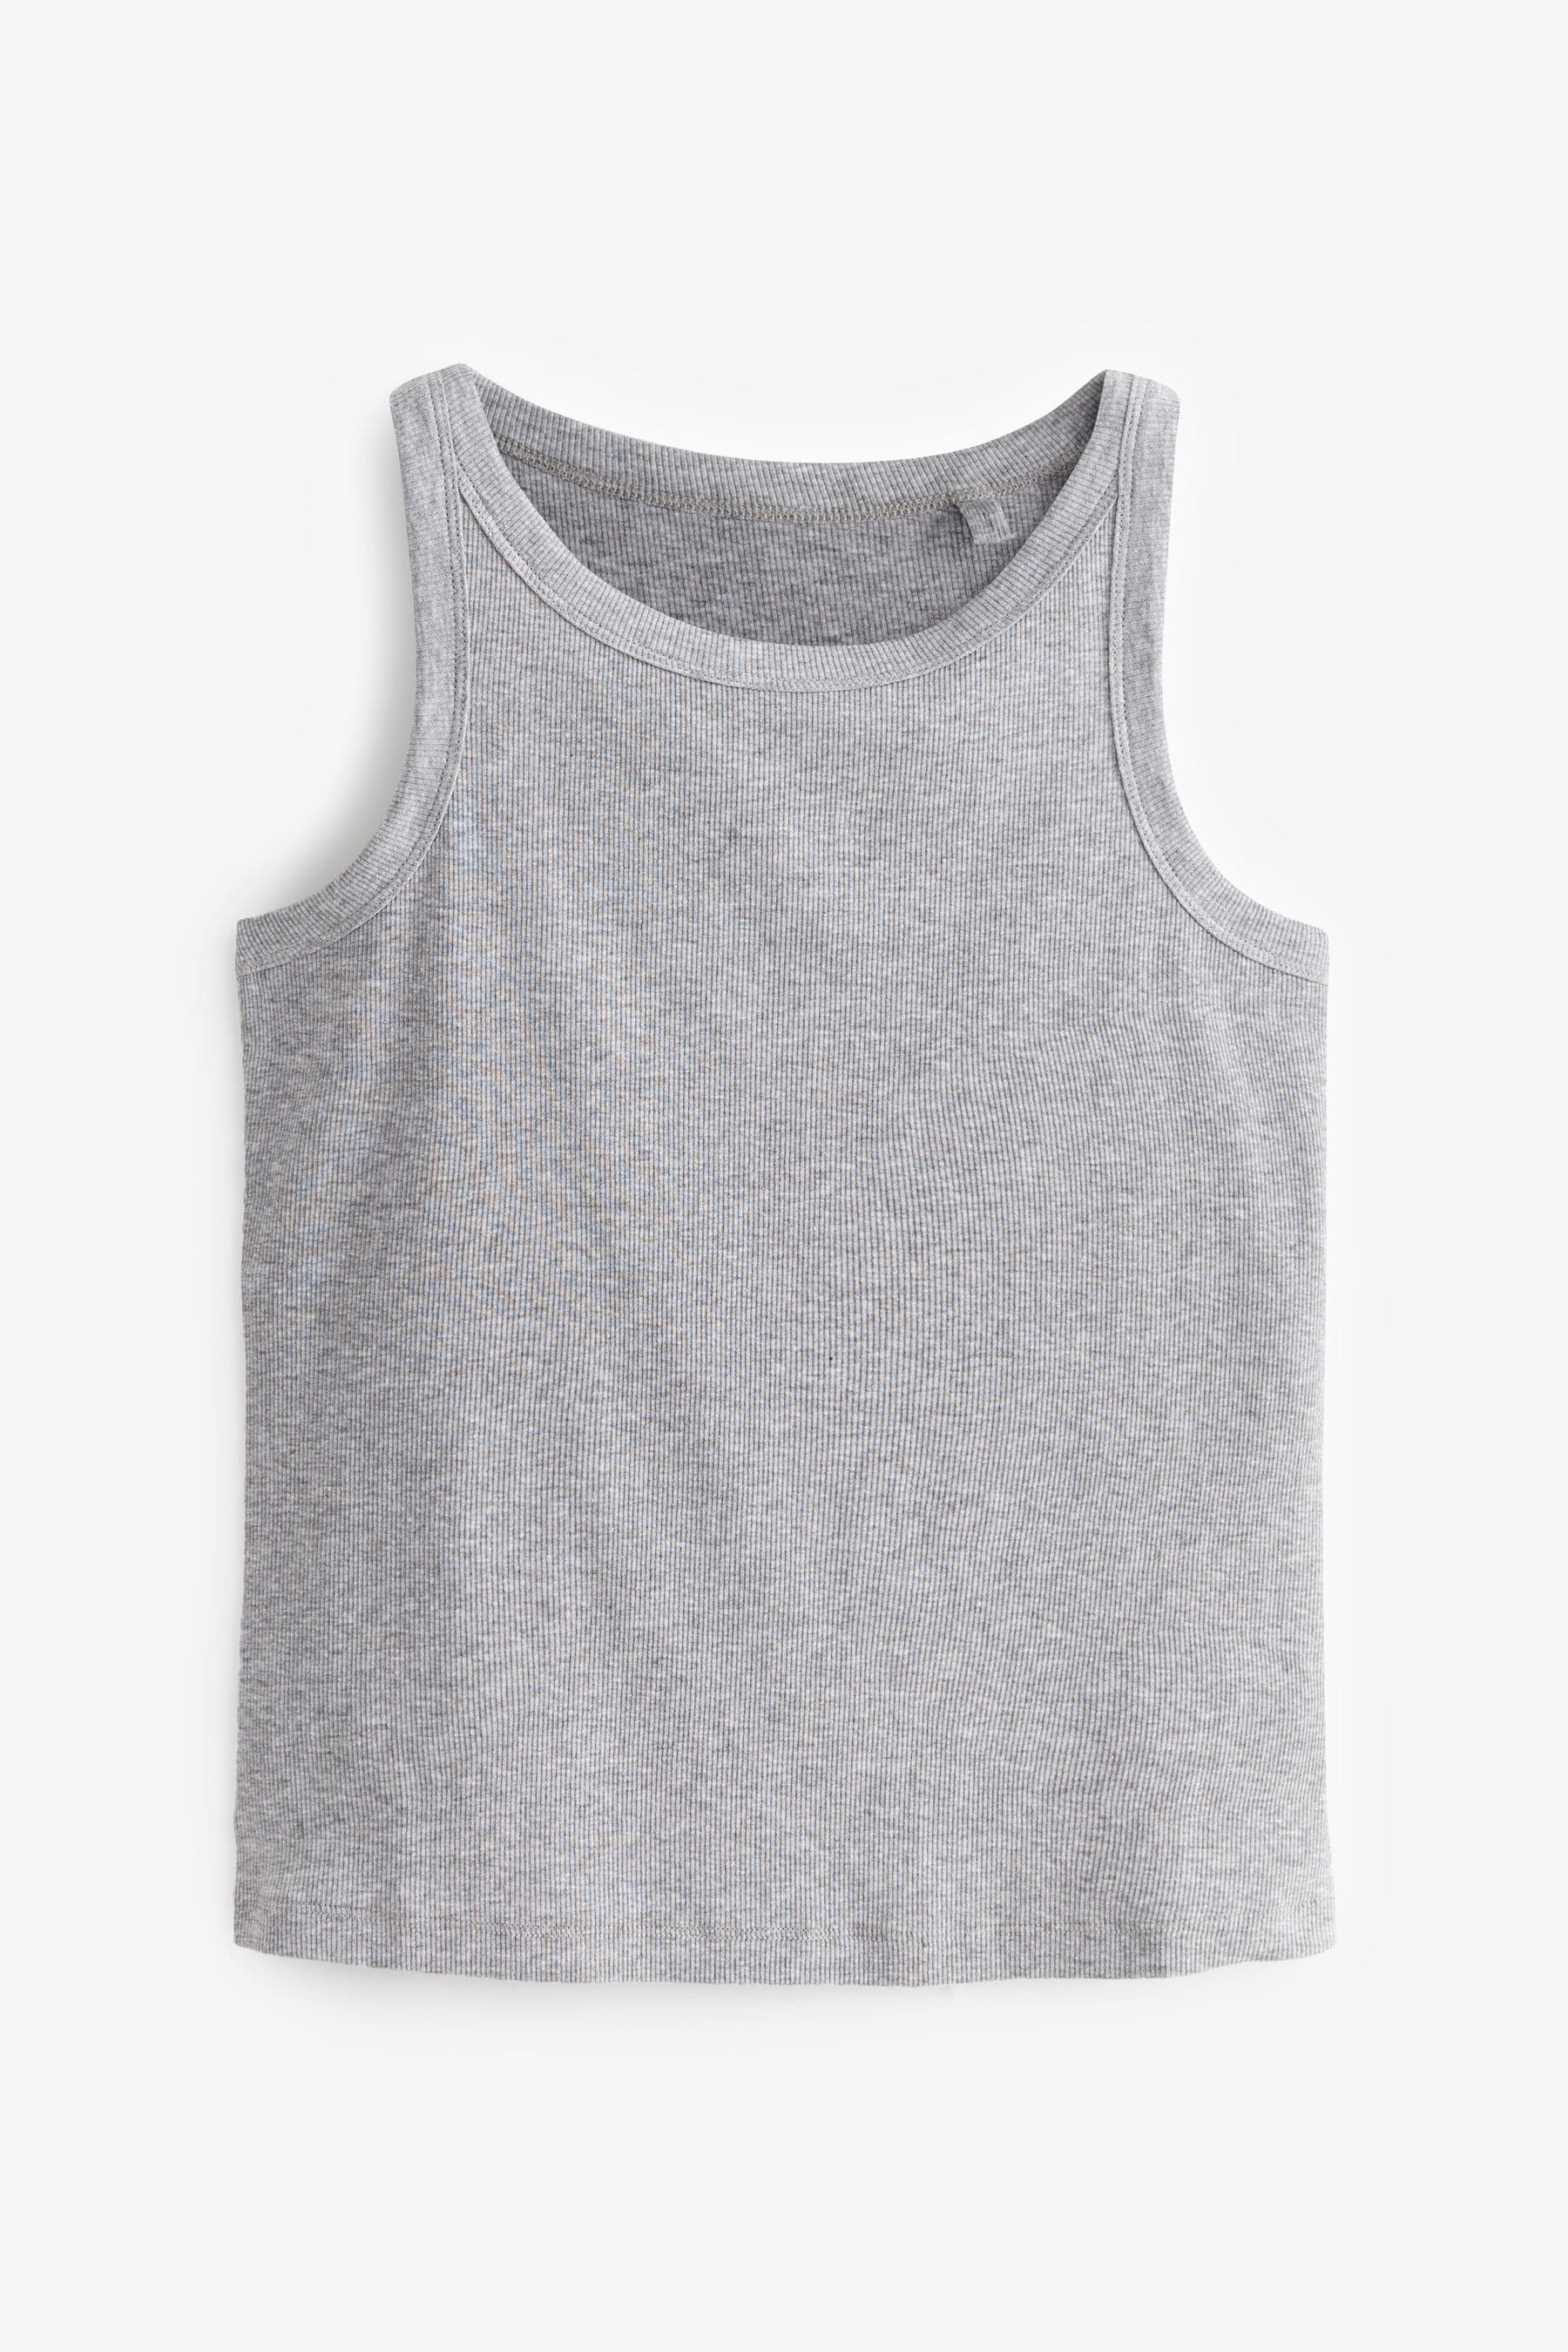 Buy Ribbed Racer Vest from the Next UK online shop